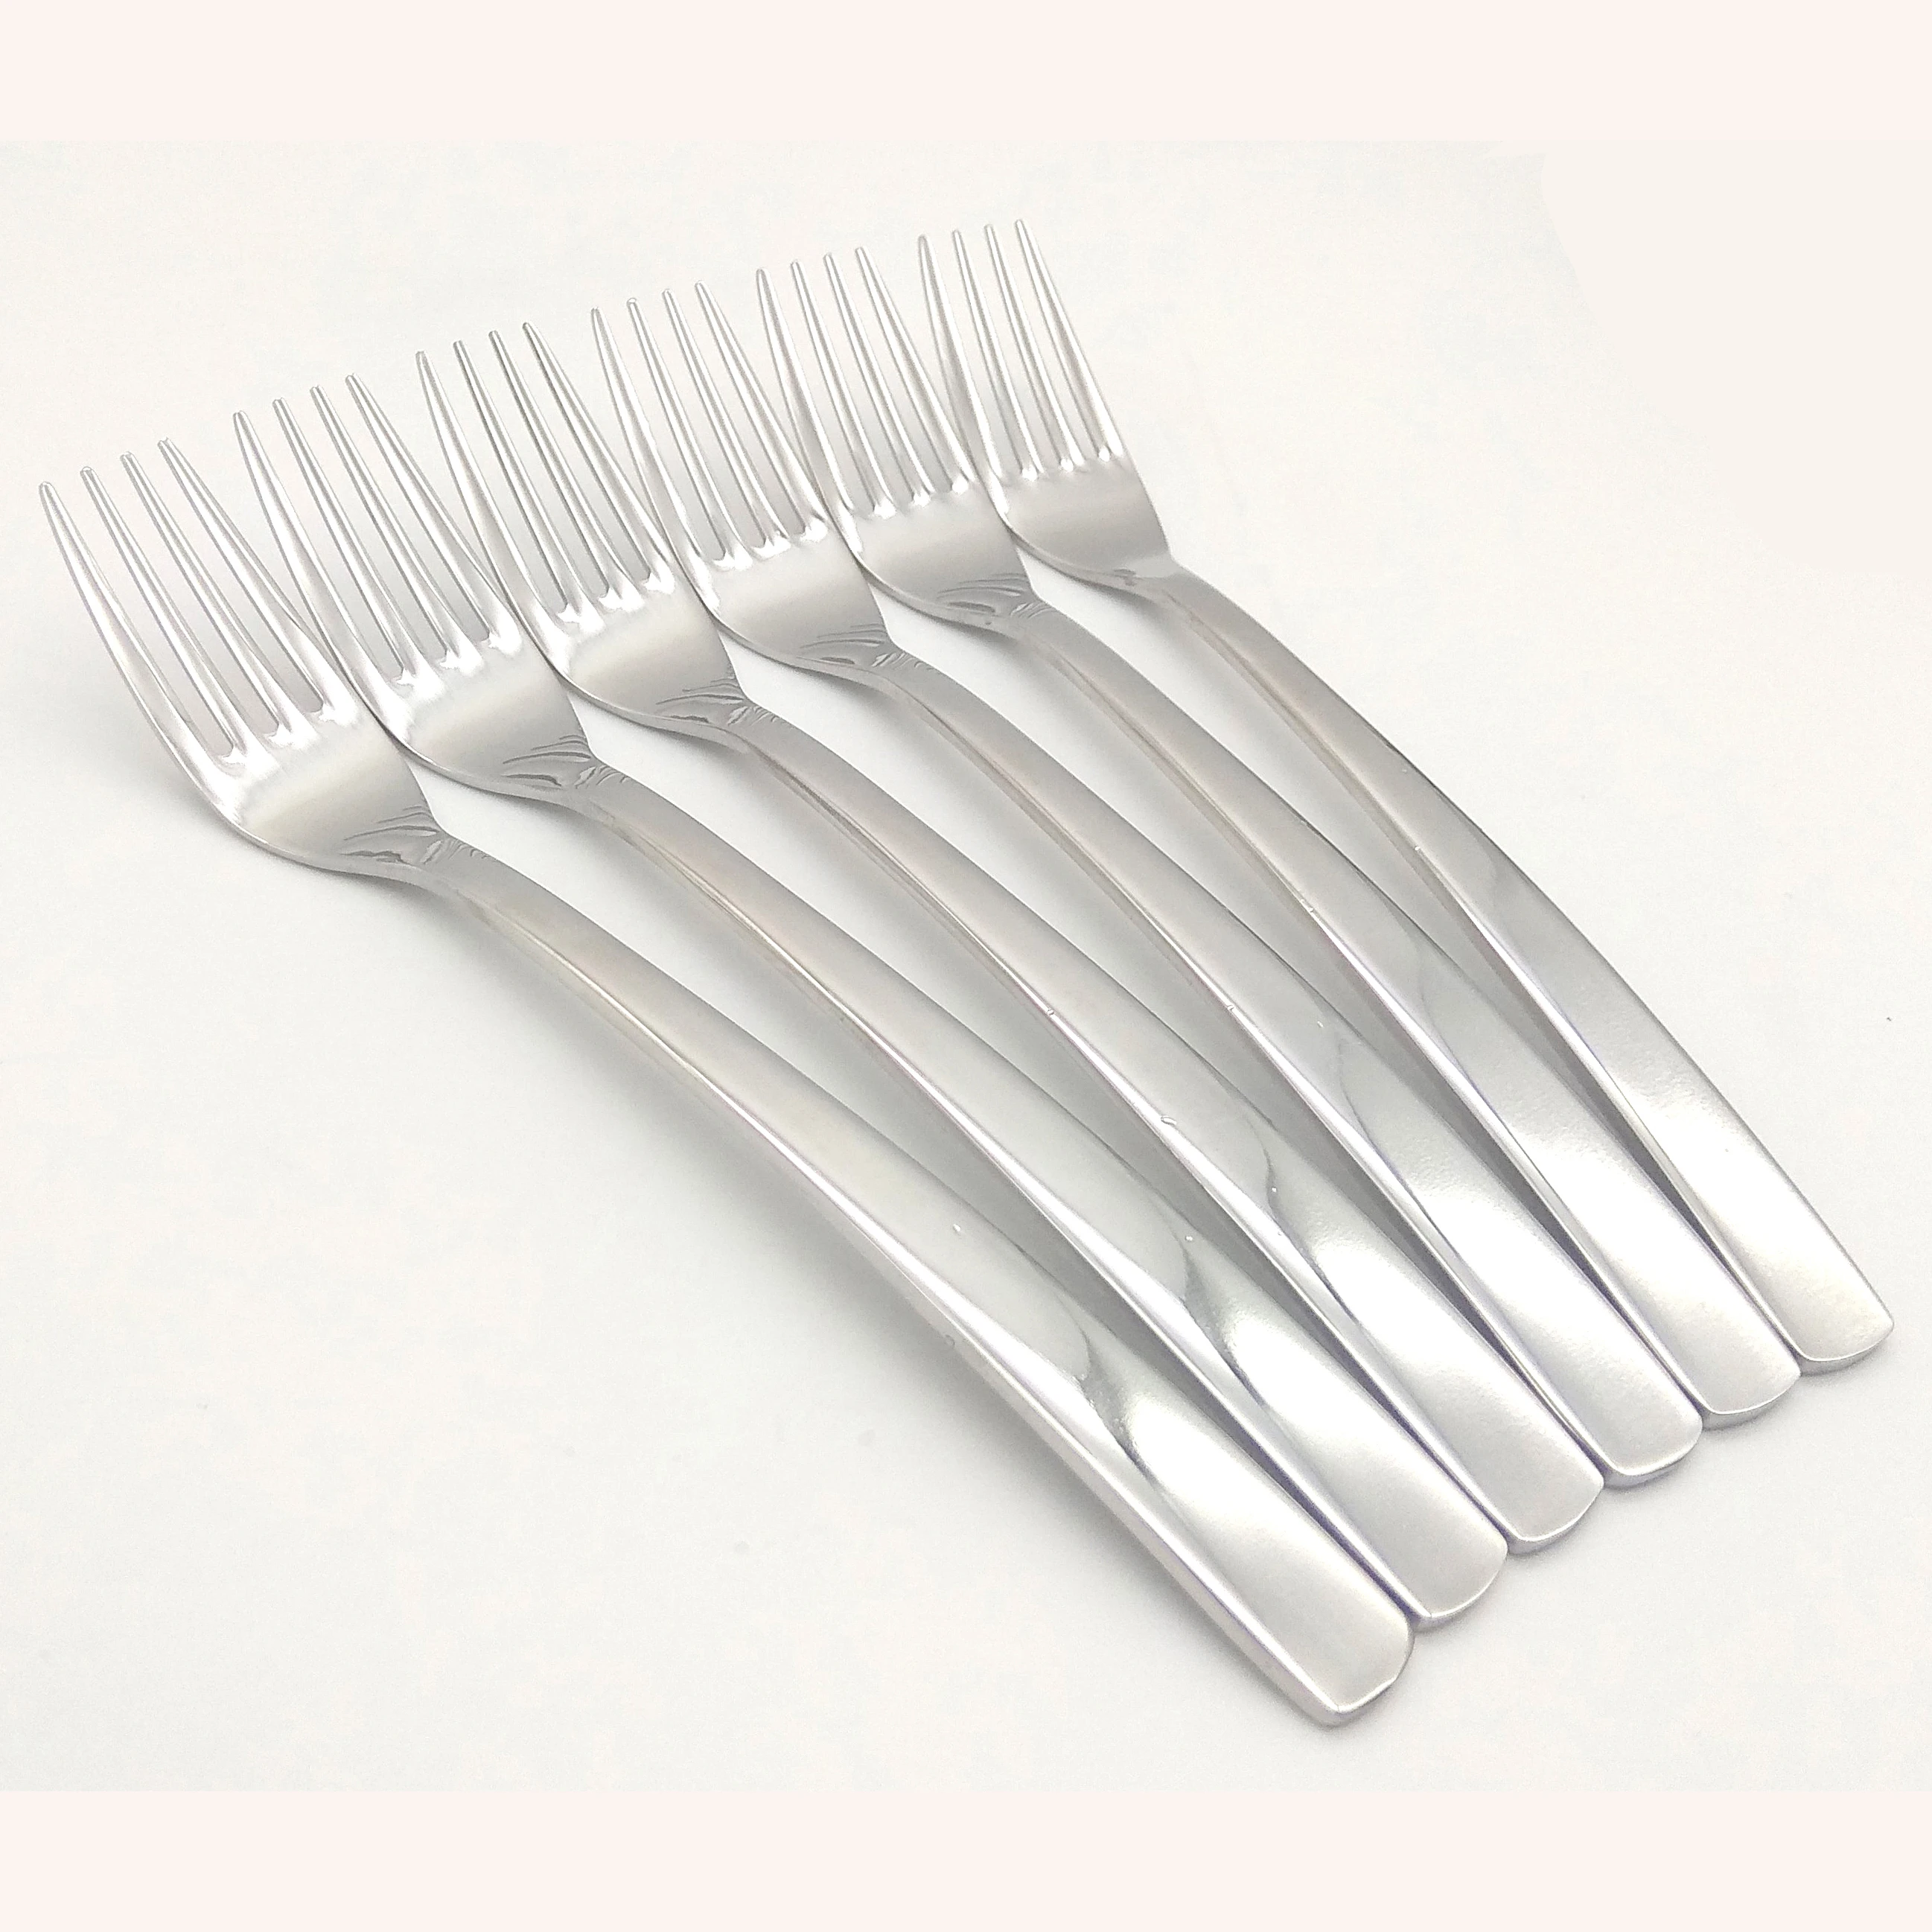 Eyre 18/10 Table Fork 12-piece Stainless Steel Cutlery Forks Set Metal Silver Cutlery Dinner Forks Only